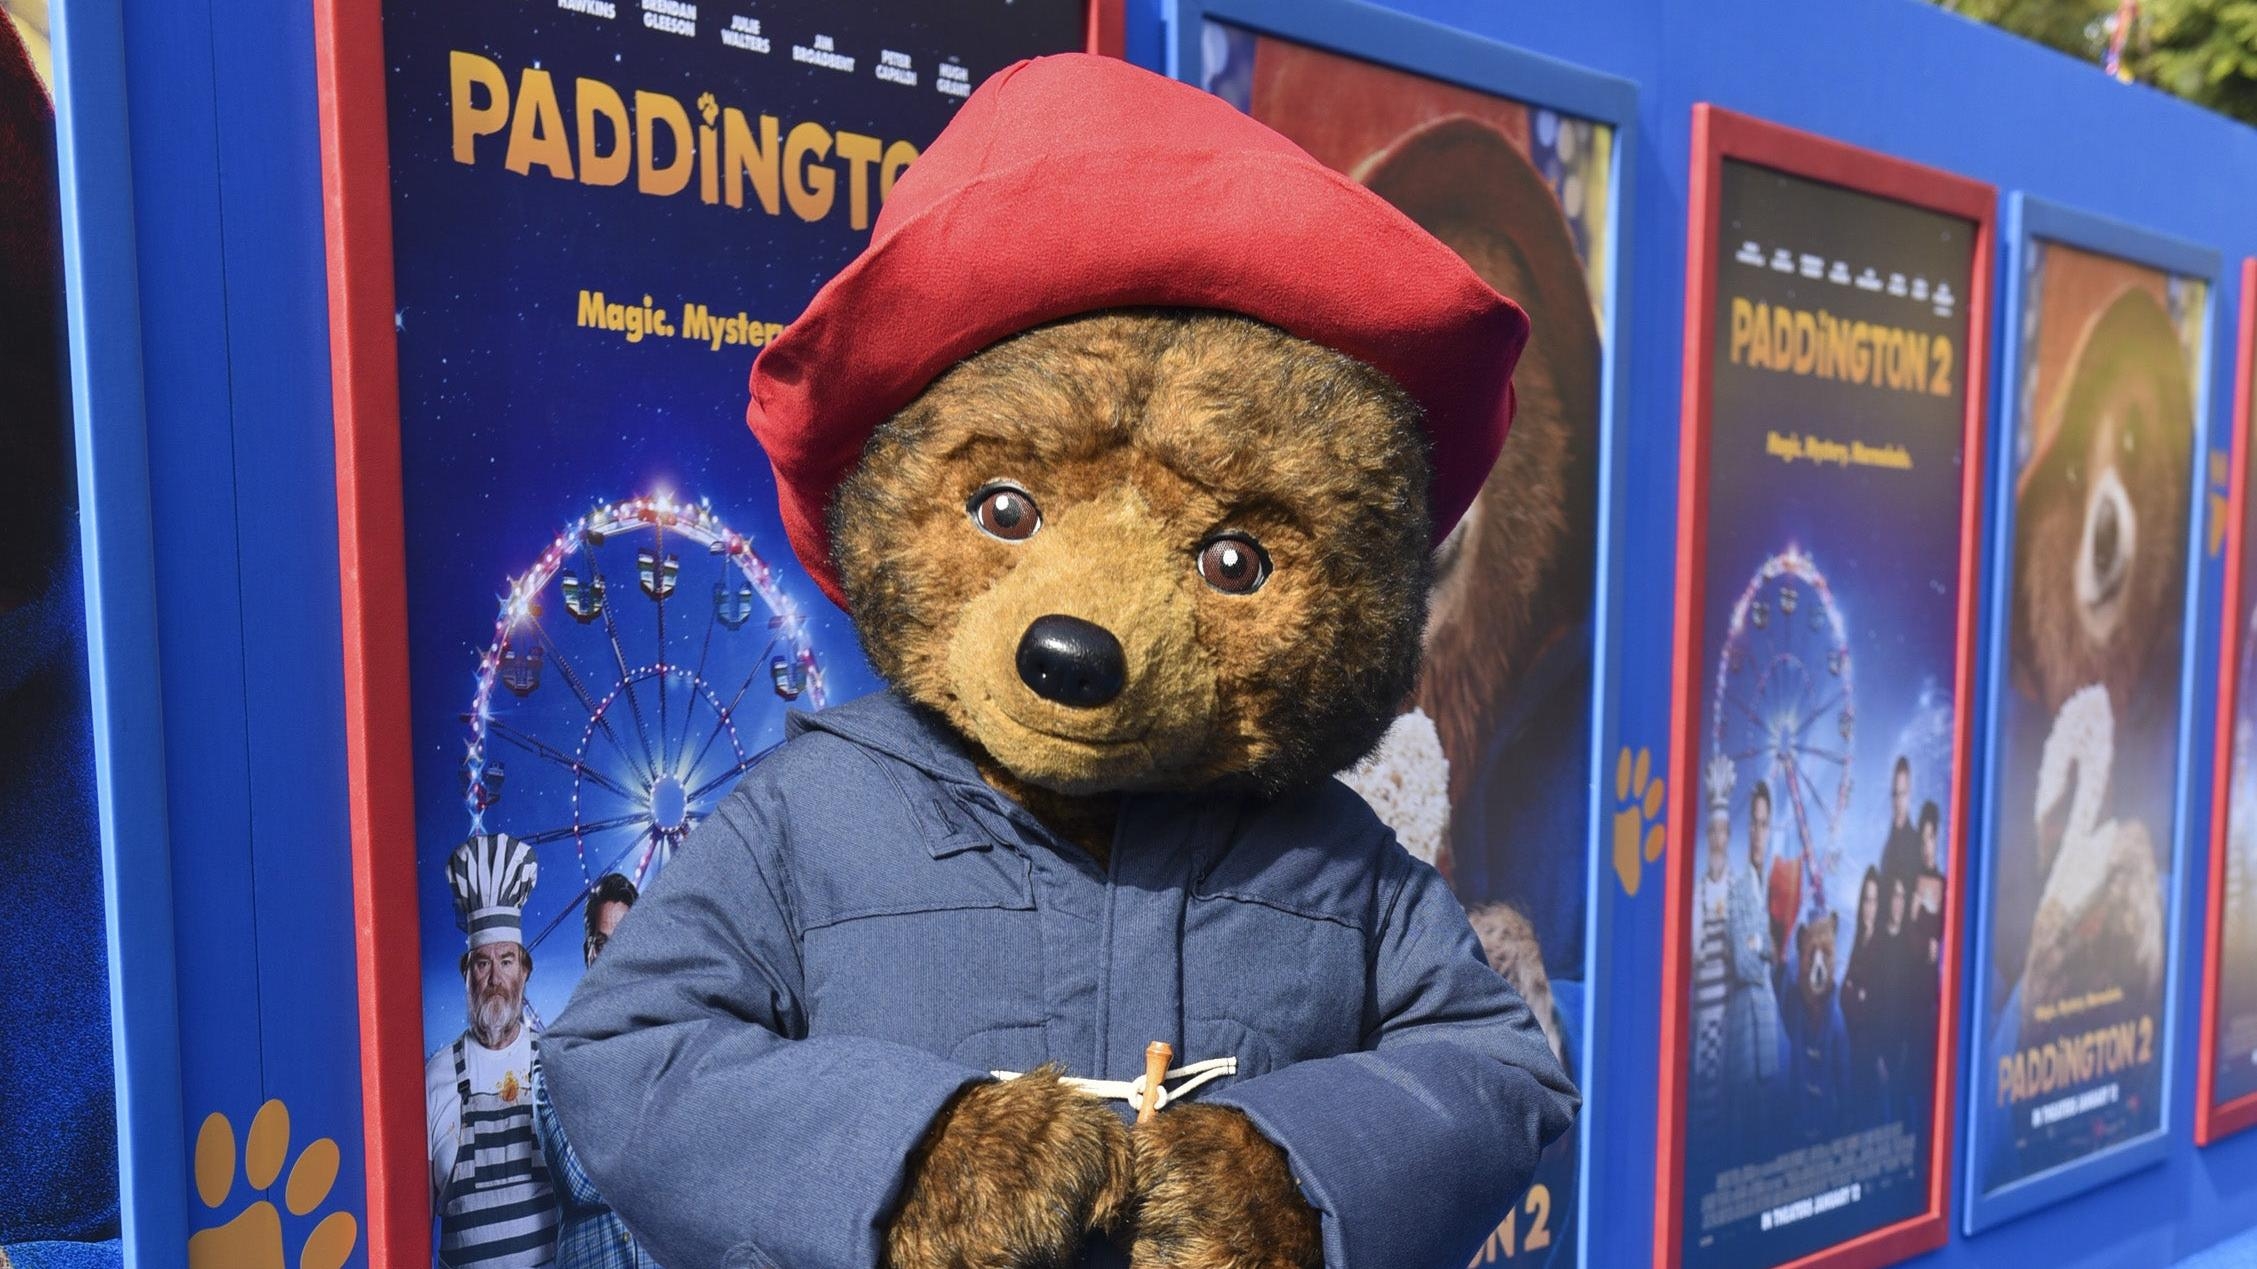 Paddington 2 loses vicious stranglehold on "best movie of all time" position